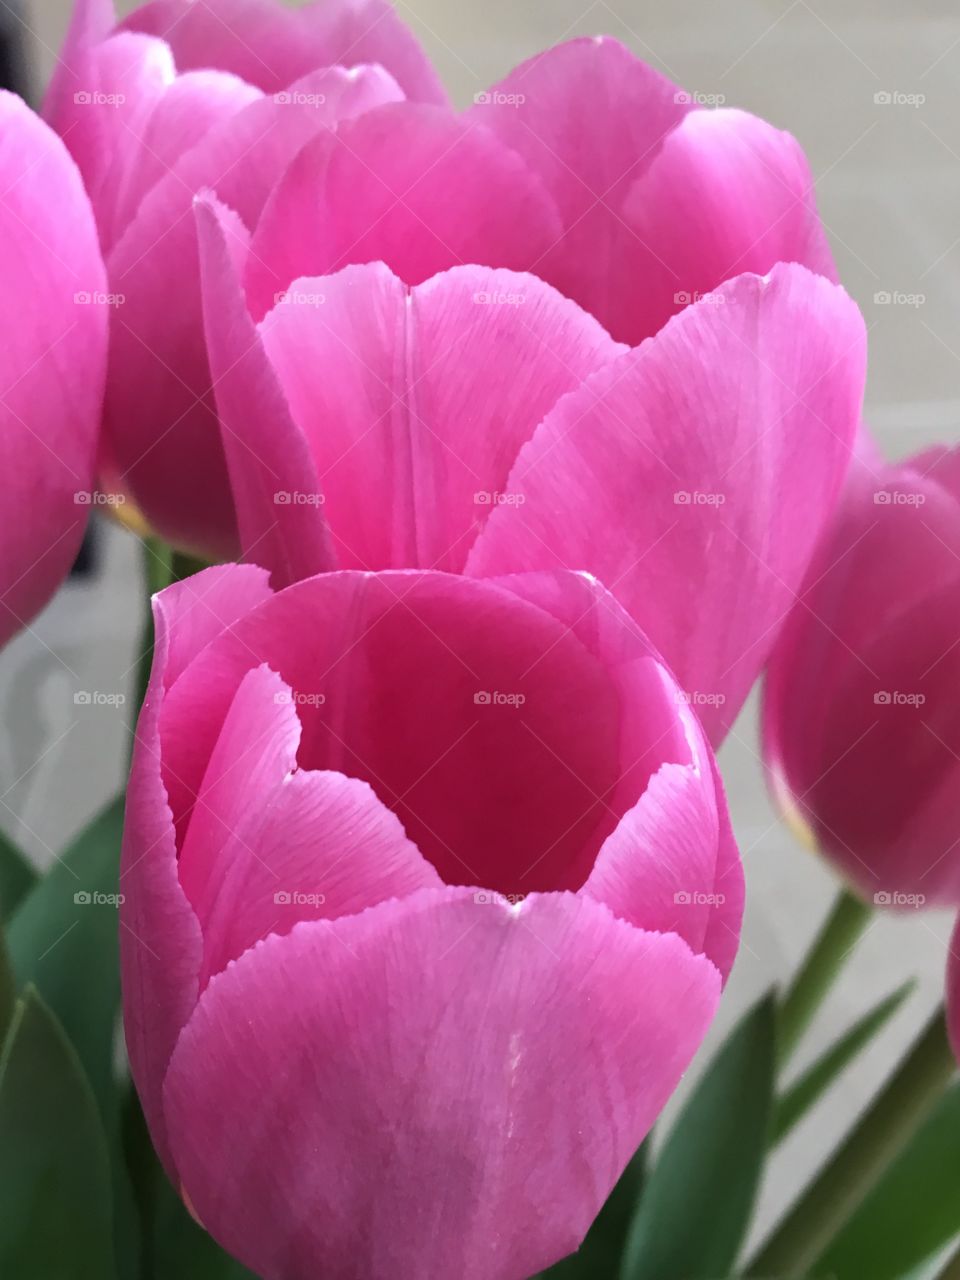 Pink tulips 